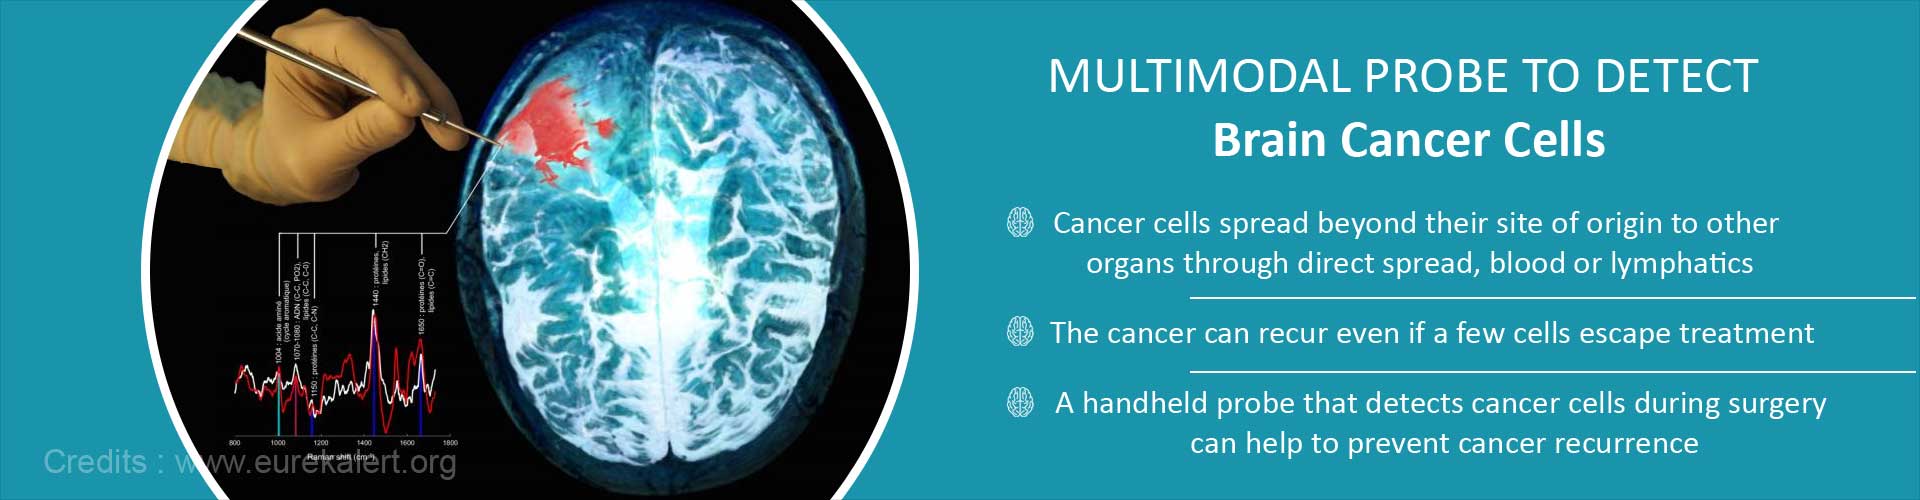 Multimodal probe to detect brain cancer cells
- Cancer cells spread beyond their site of origin to other organs through direct spread, blood or lymphatics
- The cancer can recur even if a few cells escape treatment
- A handheld probe that detects cancer cells during surgery can help to prevent cancer recurrence